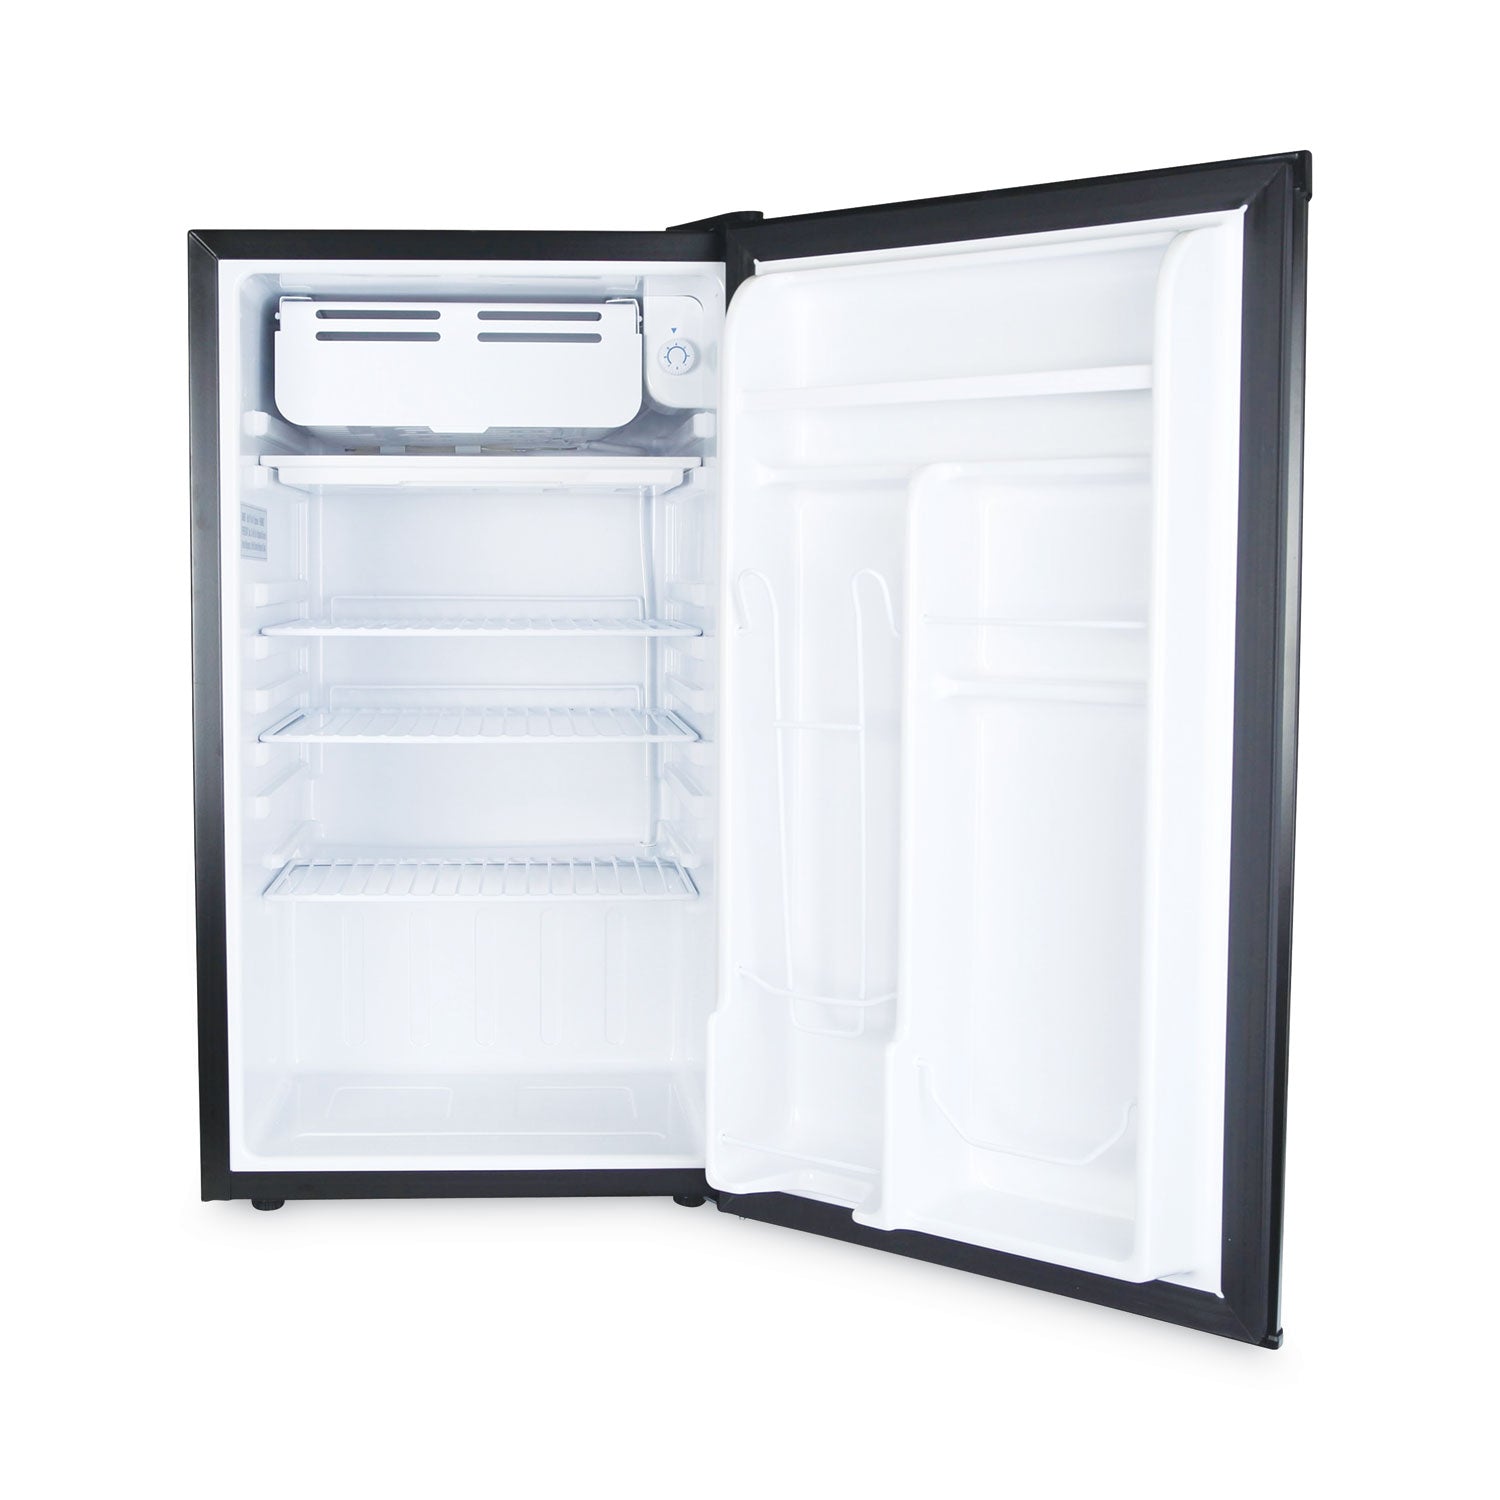 32-cu-ft-refrigerator-with-chiller-compartment-black_alerf333b - 3